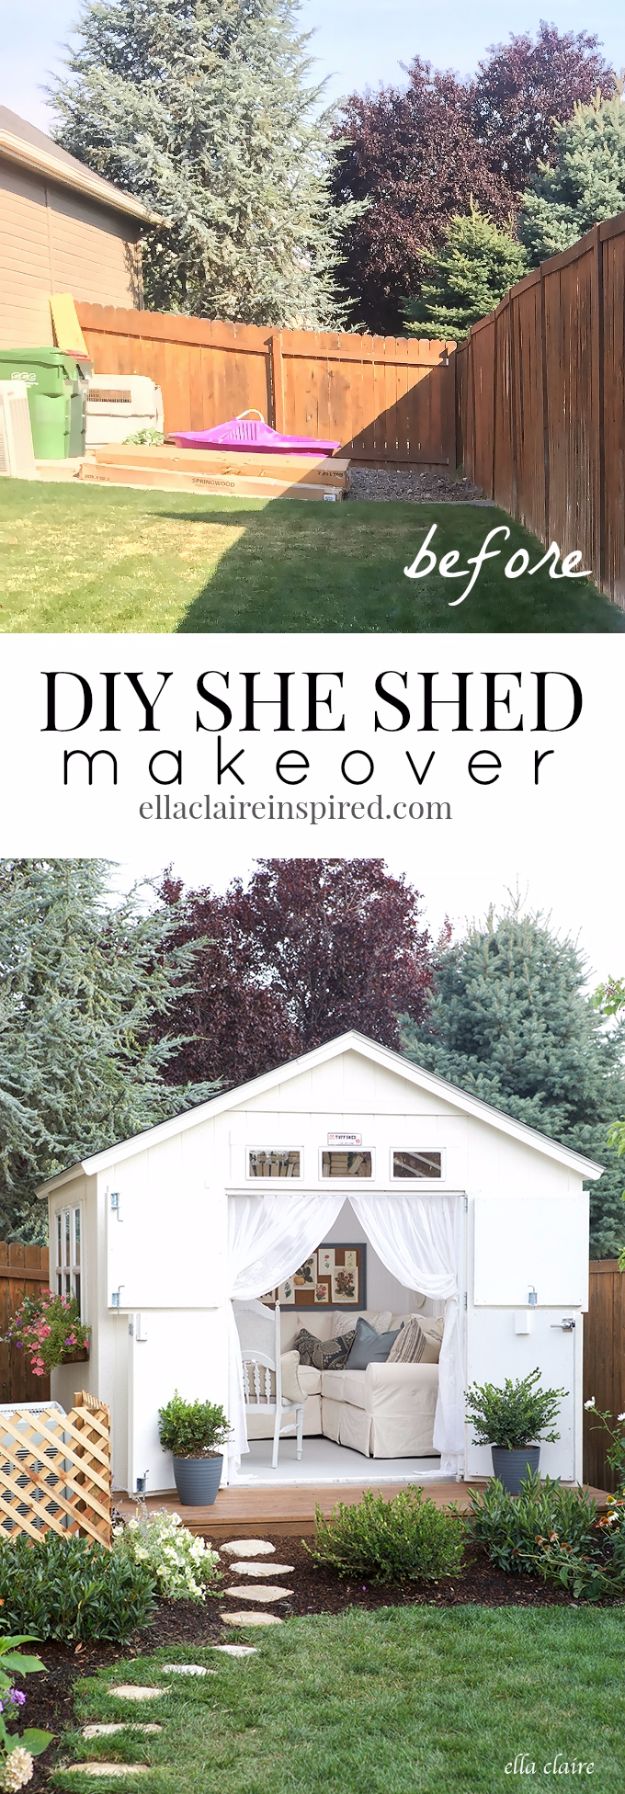 DIY Storage Sheds and Plans - DIY SHE Shed Makeover - Cool and Easy Storage Shed Makeovers, Cheap Ideas to Build This Weekend, Basic Woodworking Projects to Add Extra Storage Space to Your Home or Small Backyard - How To Build A Shed With Pallets - Step by Step Tutorials and Instructions #storageideas #diyideas #diyhome